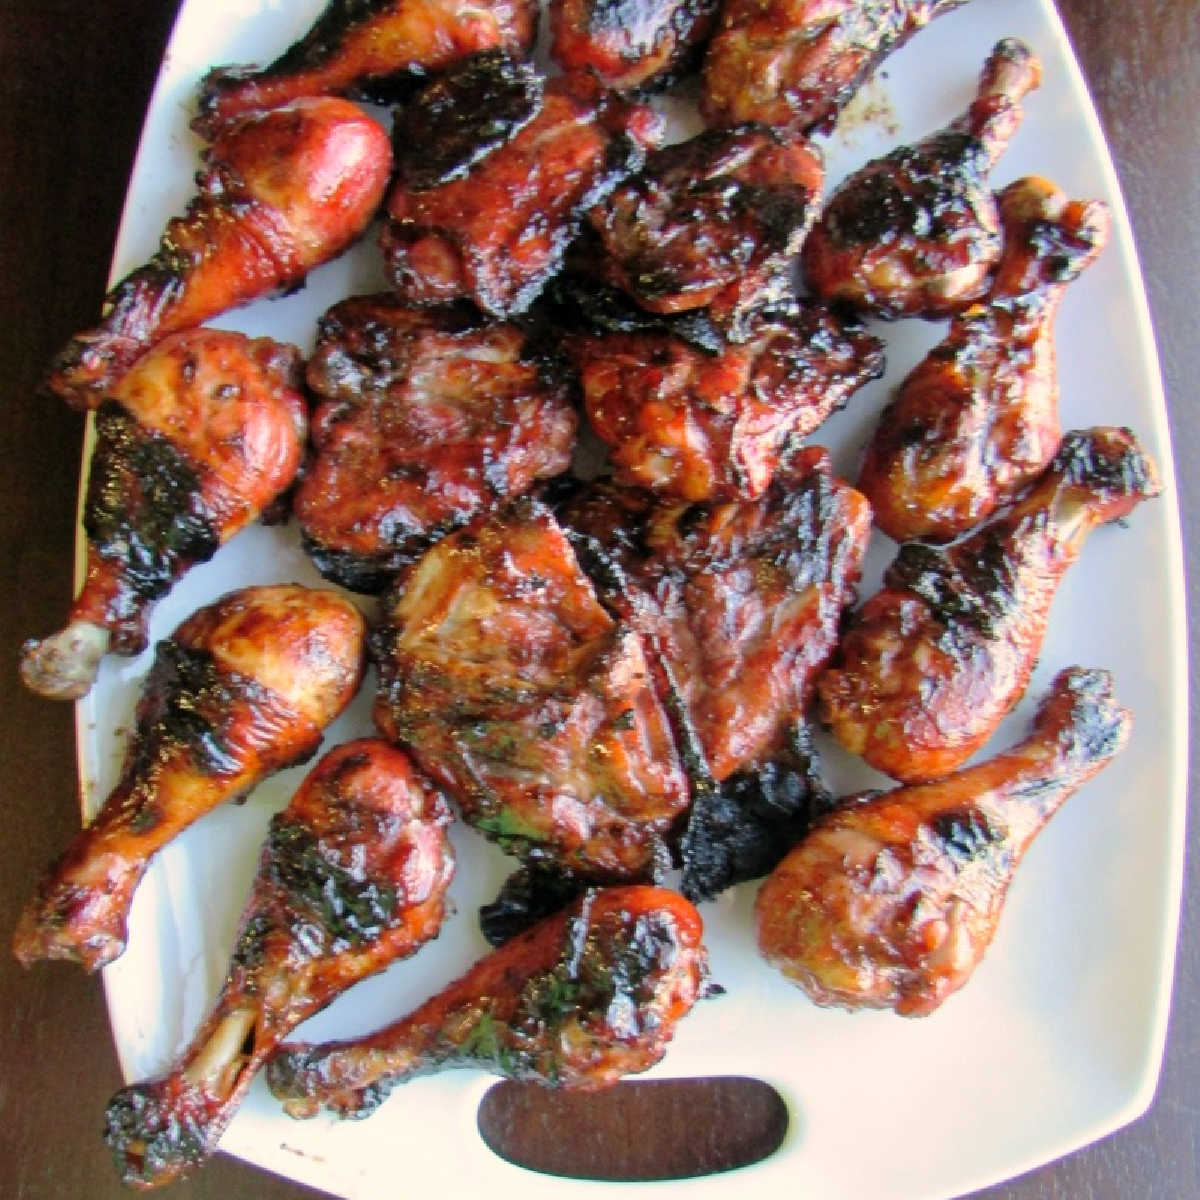 platter of shiny red grilled chicken drumsticks and thighs.